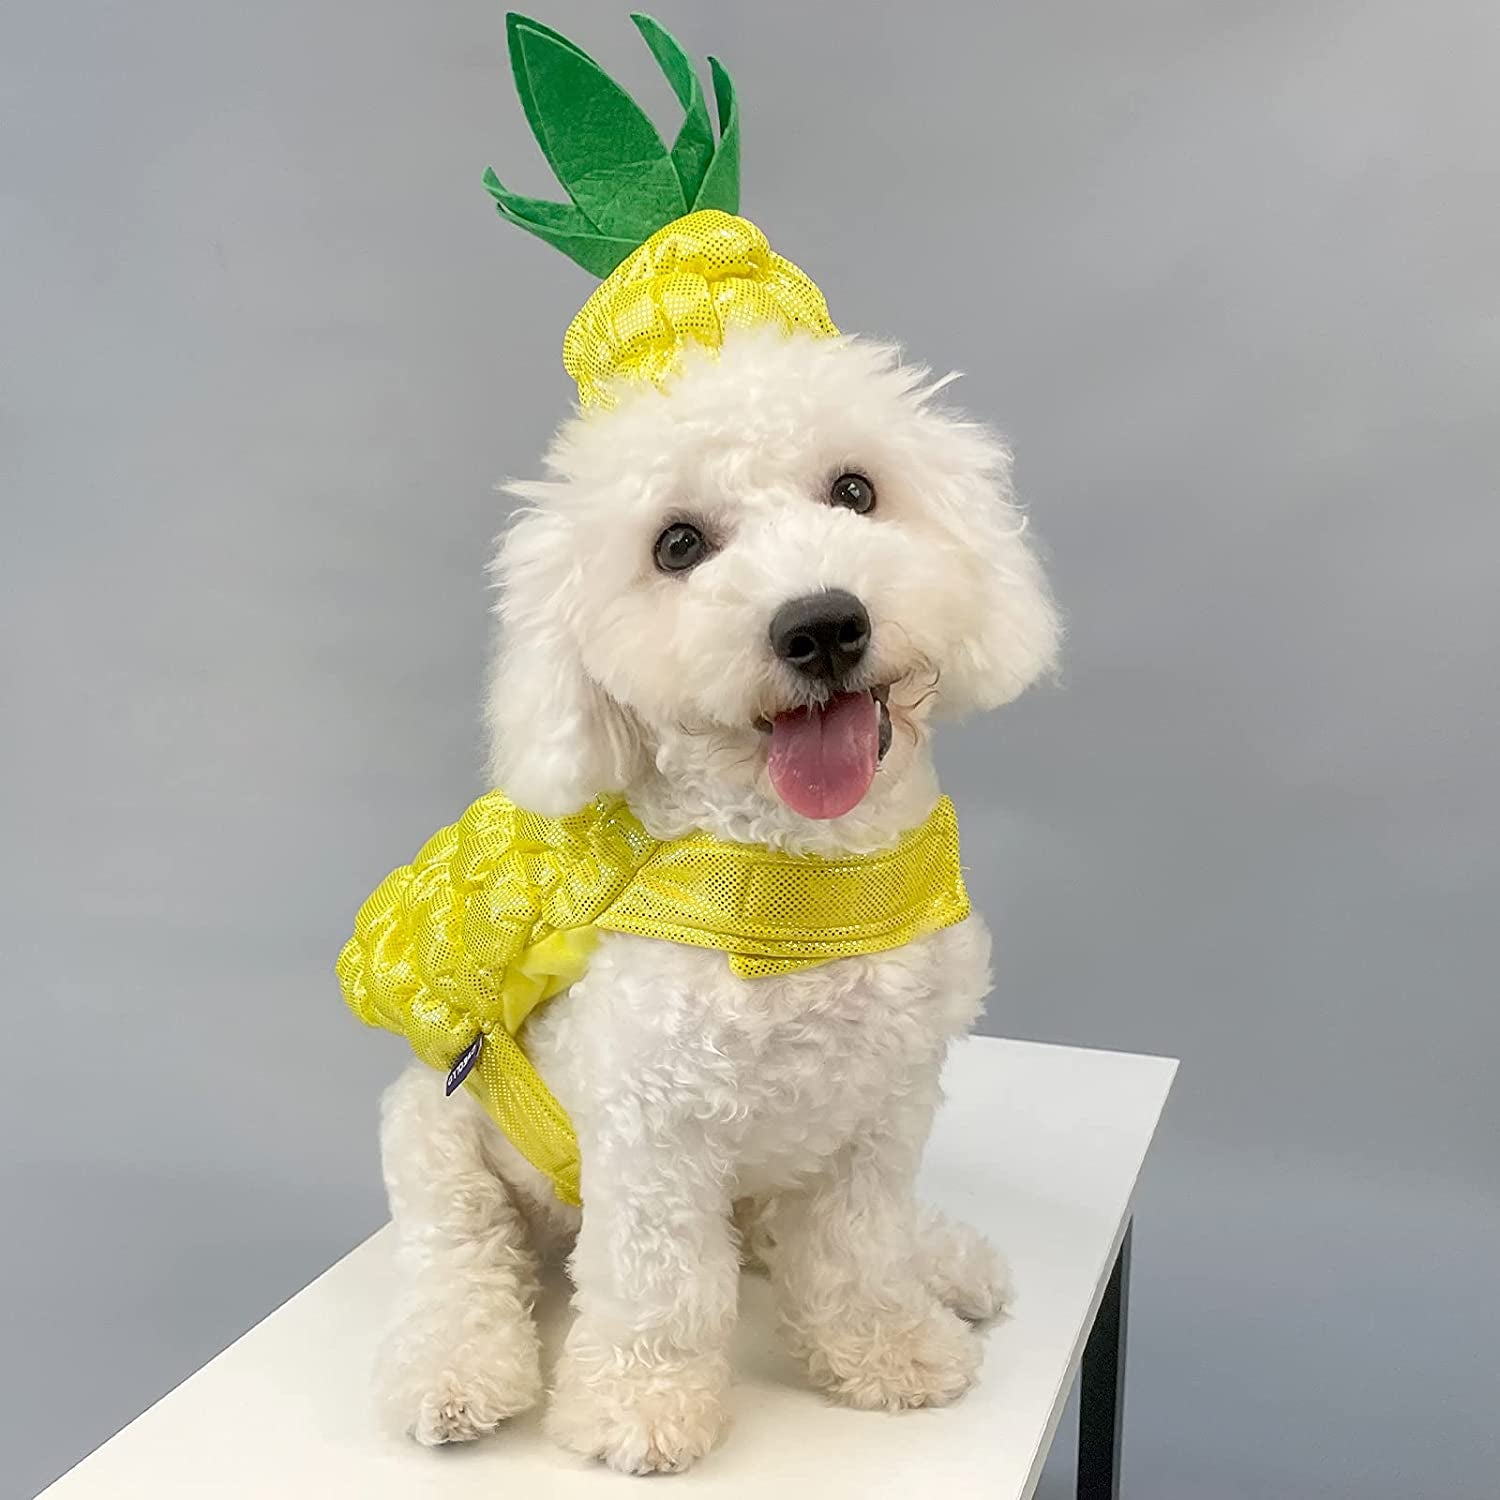 Cyeollo Dog Halloween Costume Pineapple Dress-Up Costumes Outfits Cosplay Funny Holiday Clothes for Small Dogs Size S